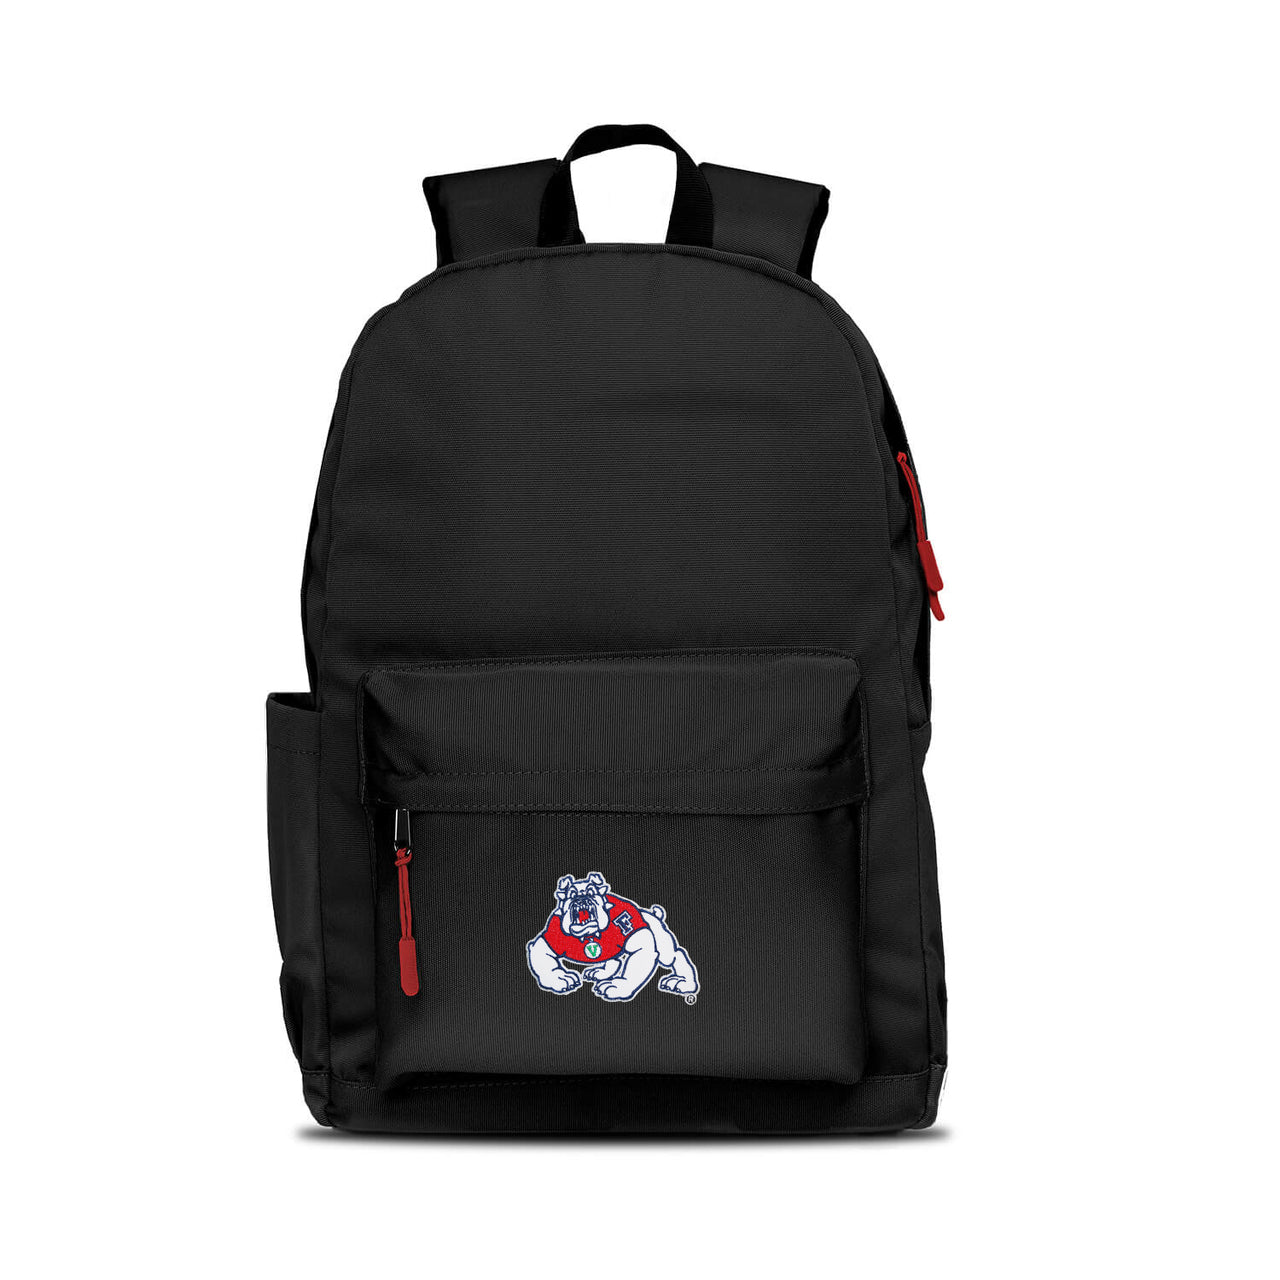 Fresno State Bulldogs Campus Laptop Backpack- Black